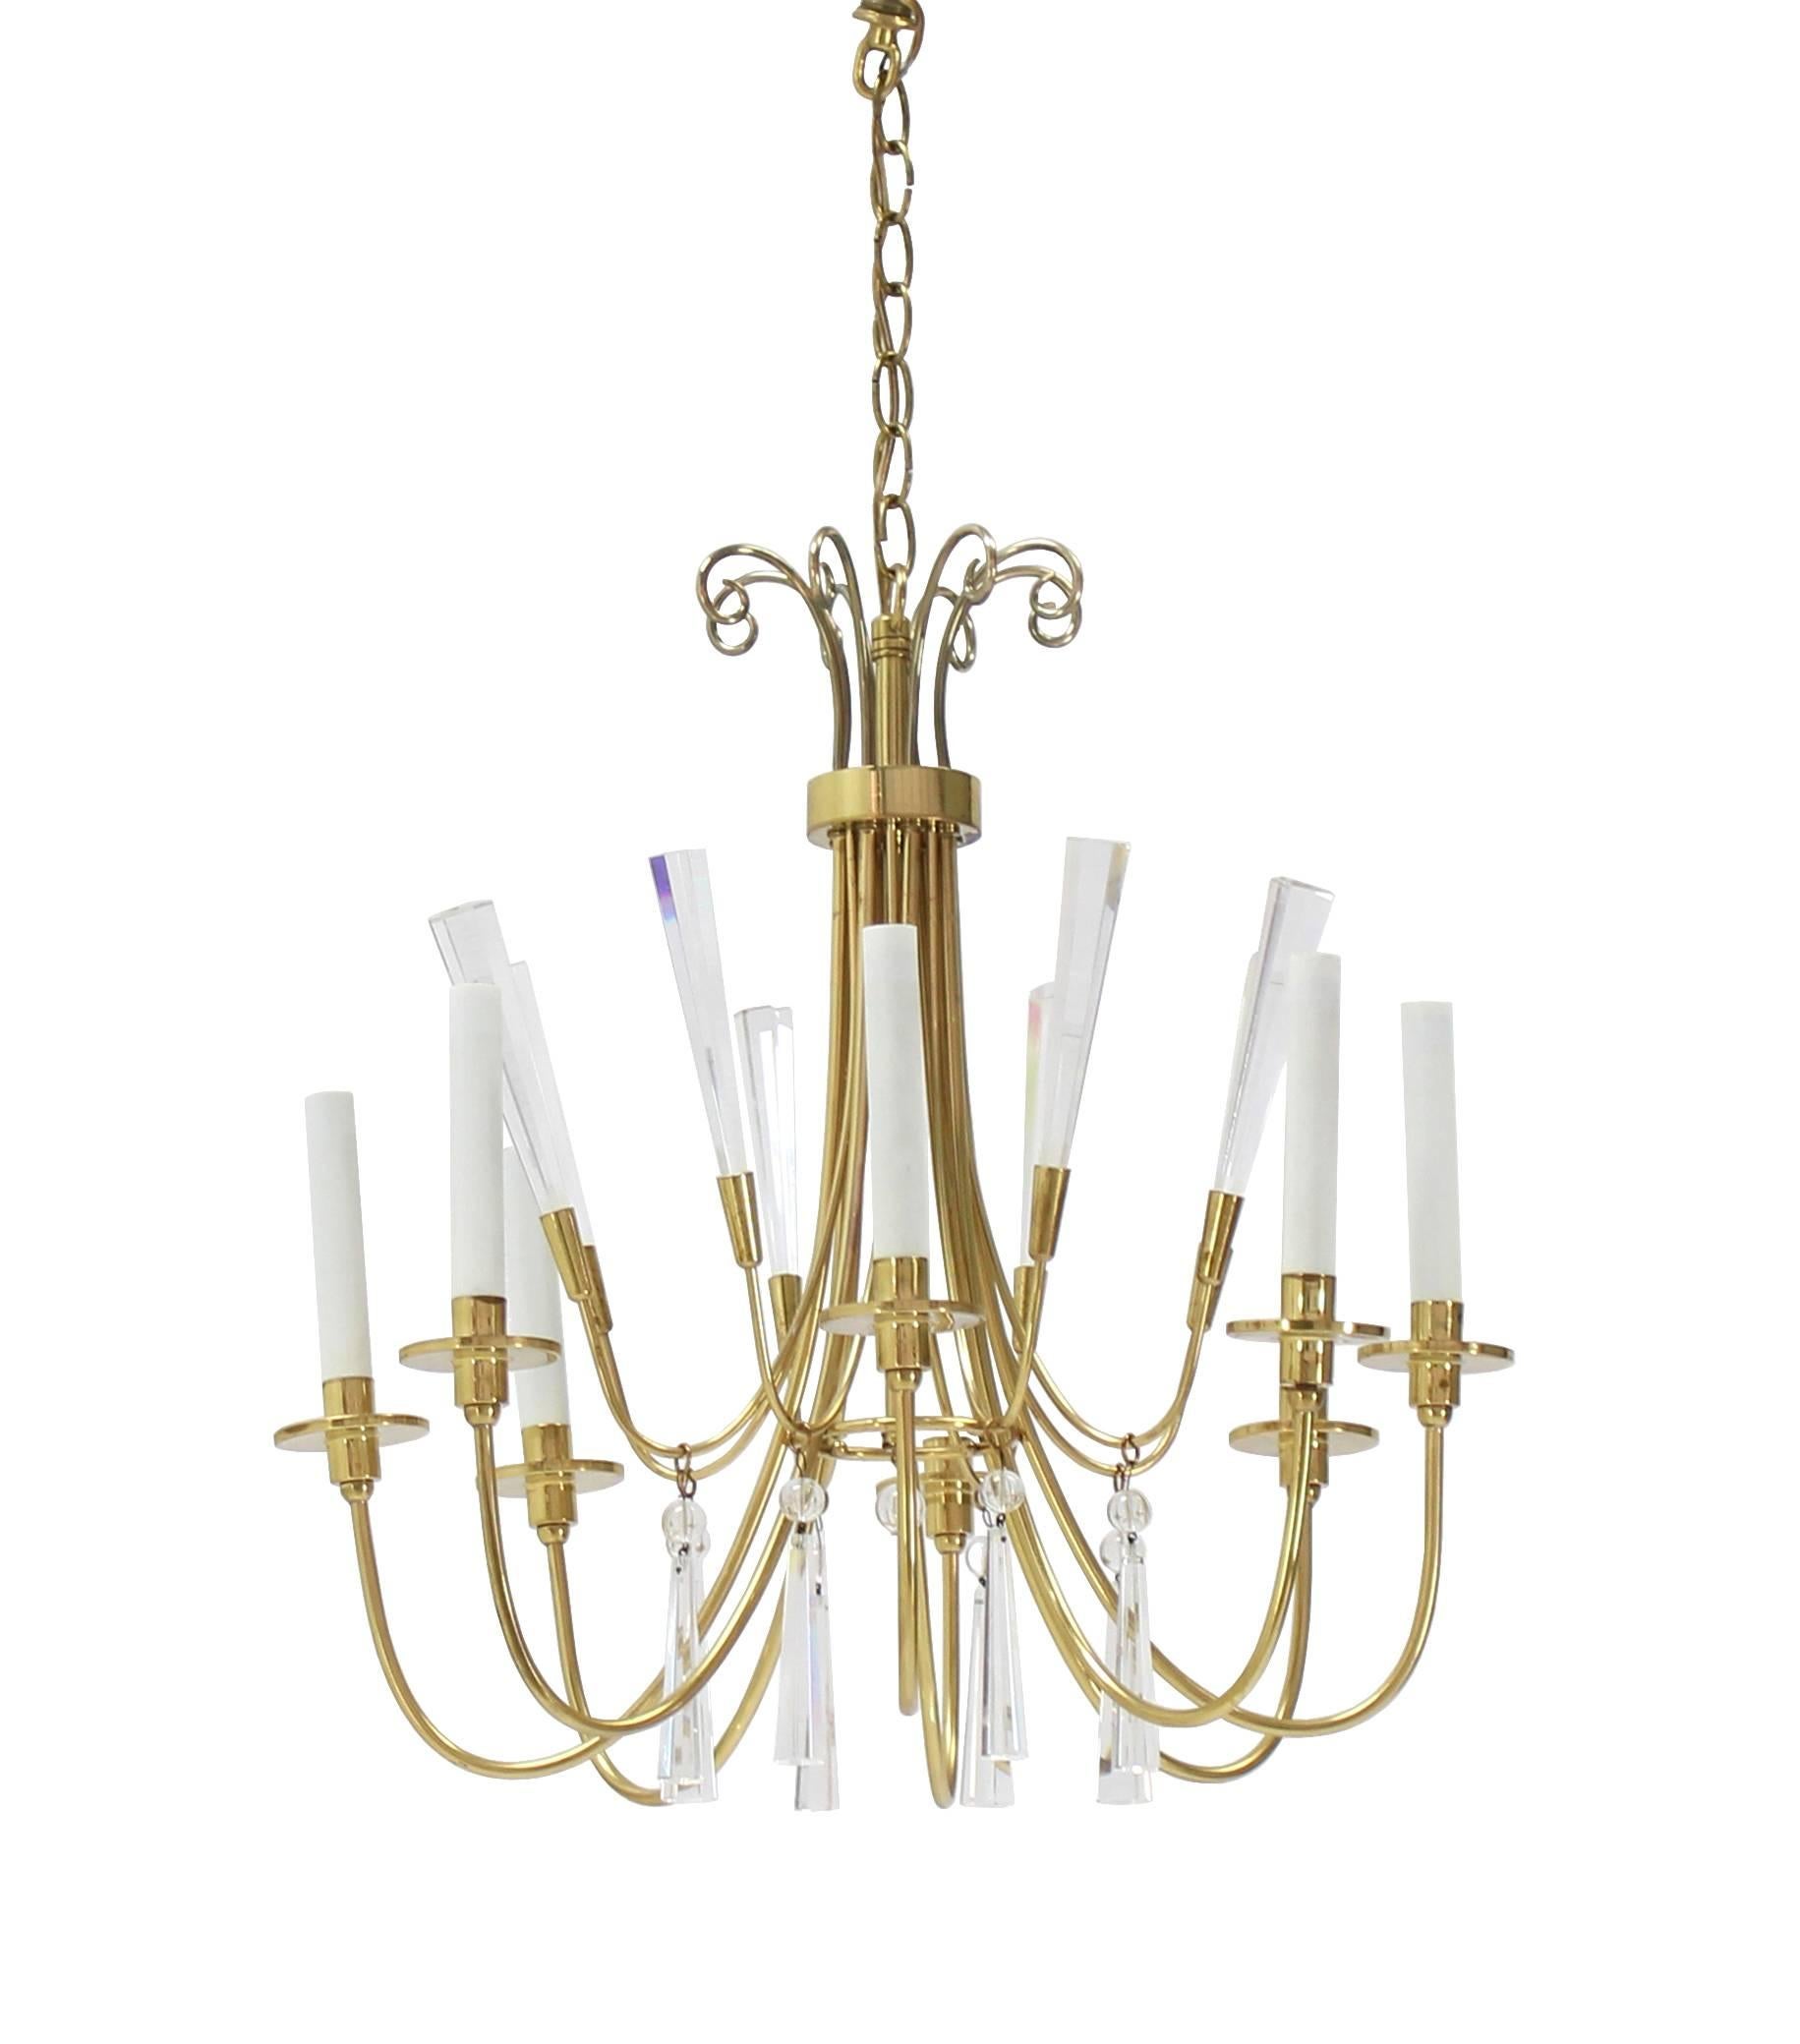 Brass and Lucite Mid-Century Modern Light Fixture Chandelier  For Sale 1